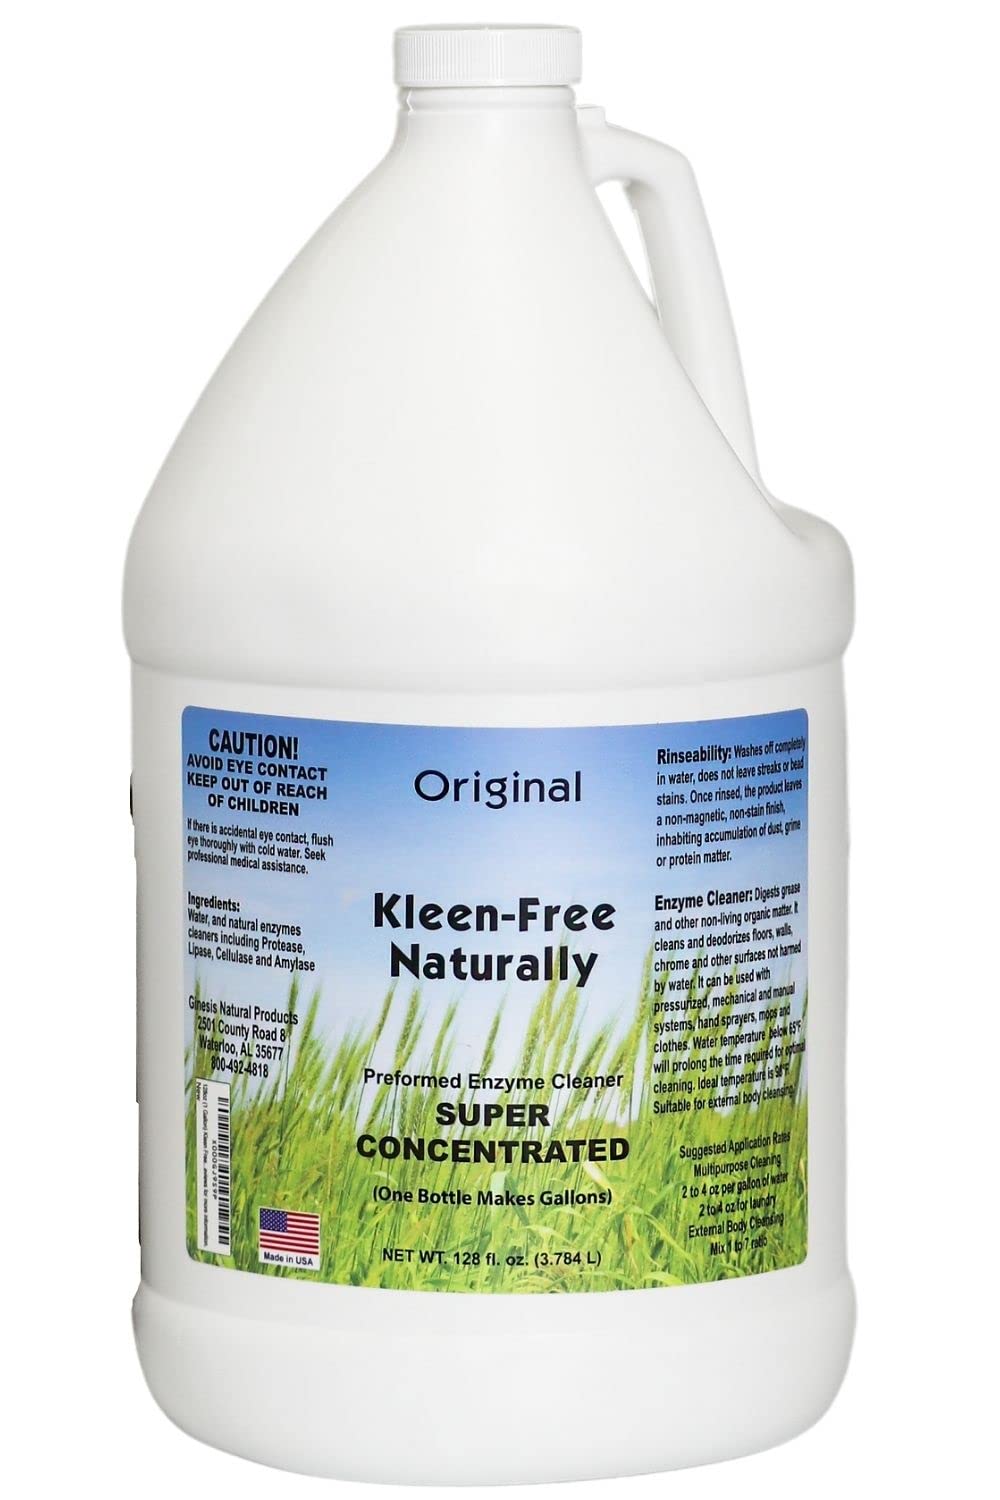 Kleen-Free Naturally Preformed Enzyme Cleaner (Original, 1-Gallon Concentrate)